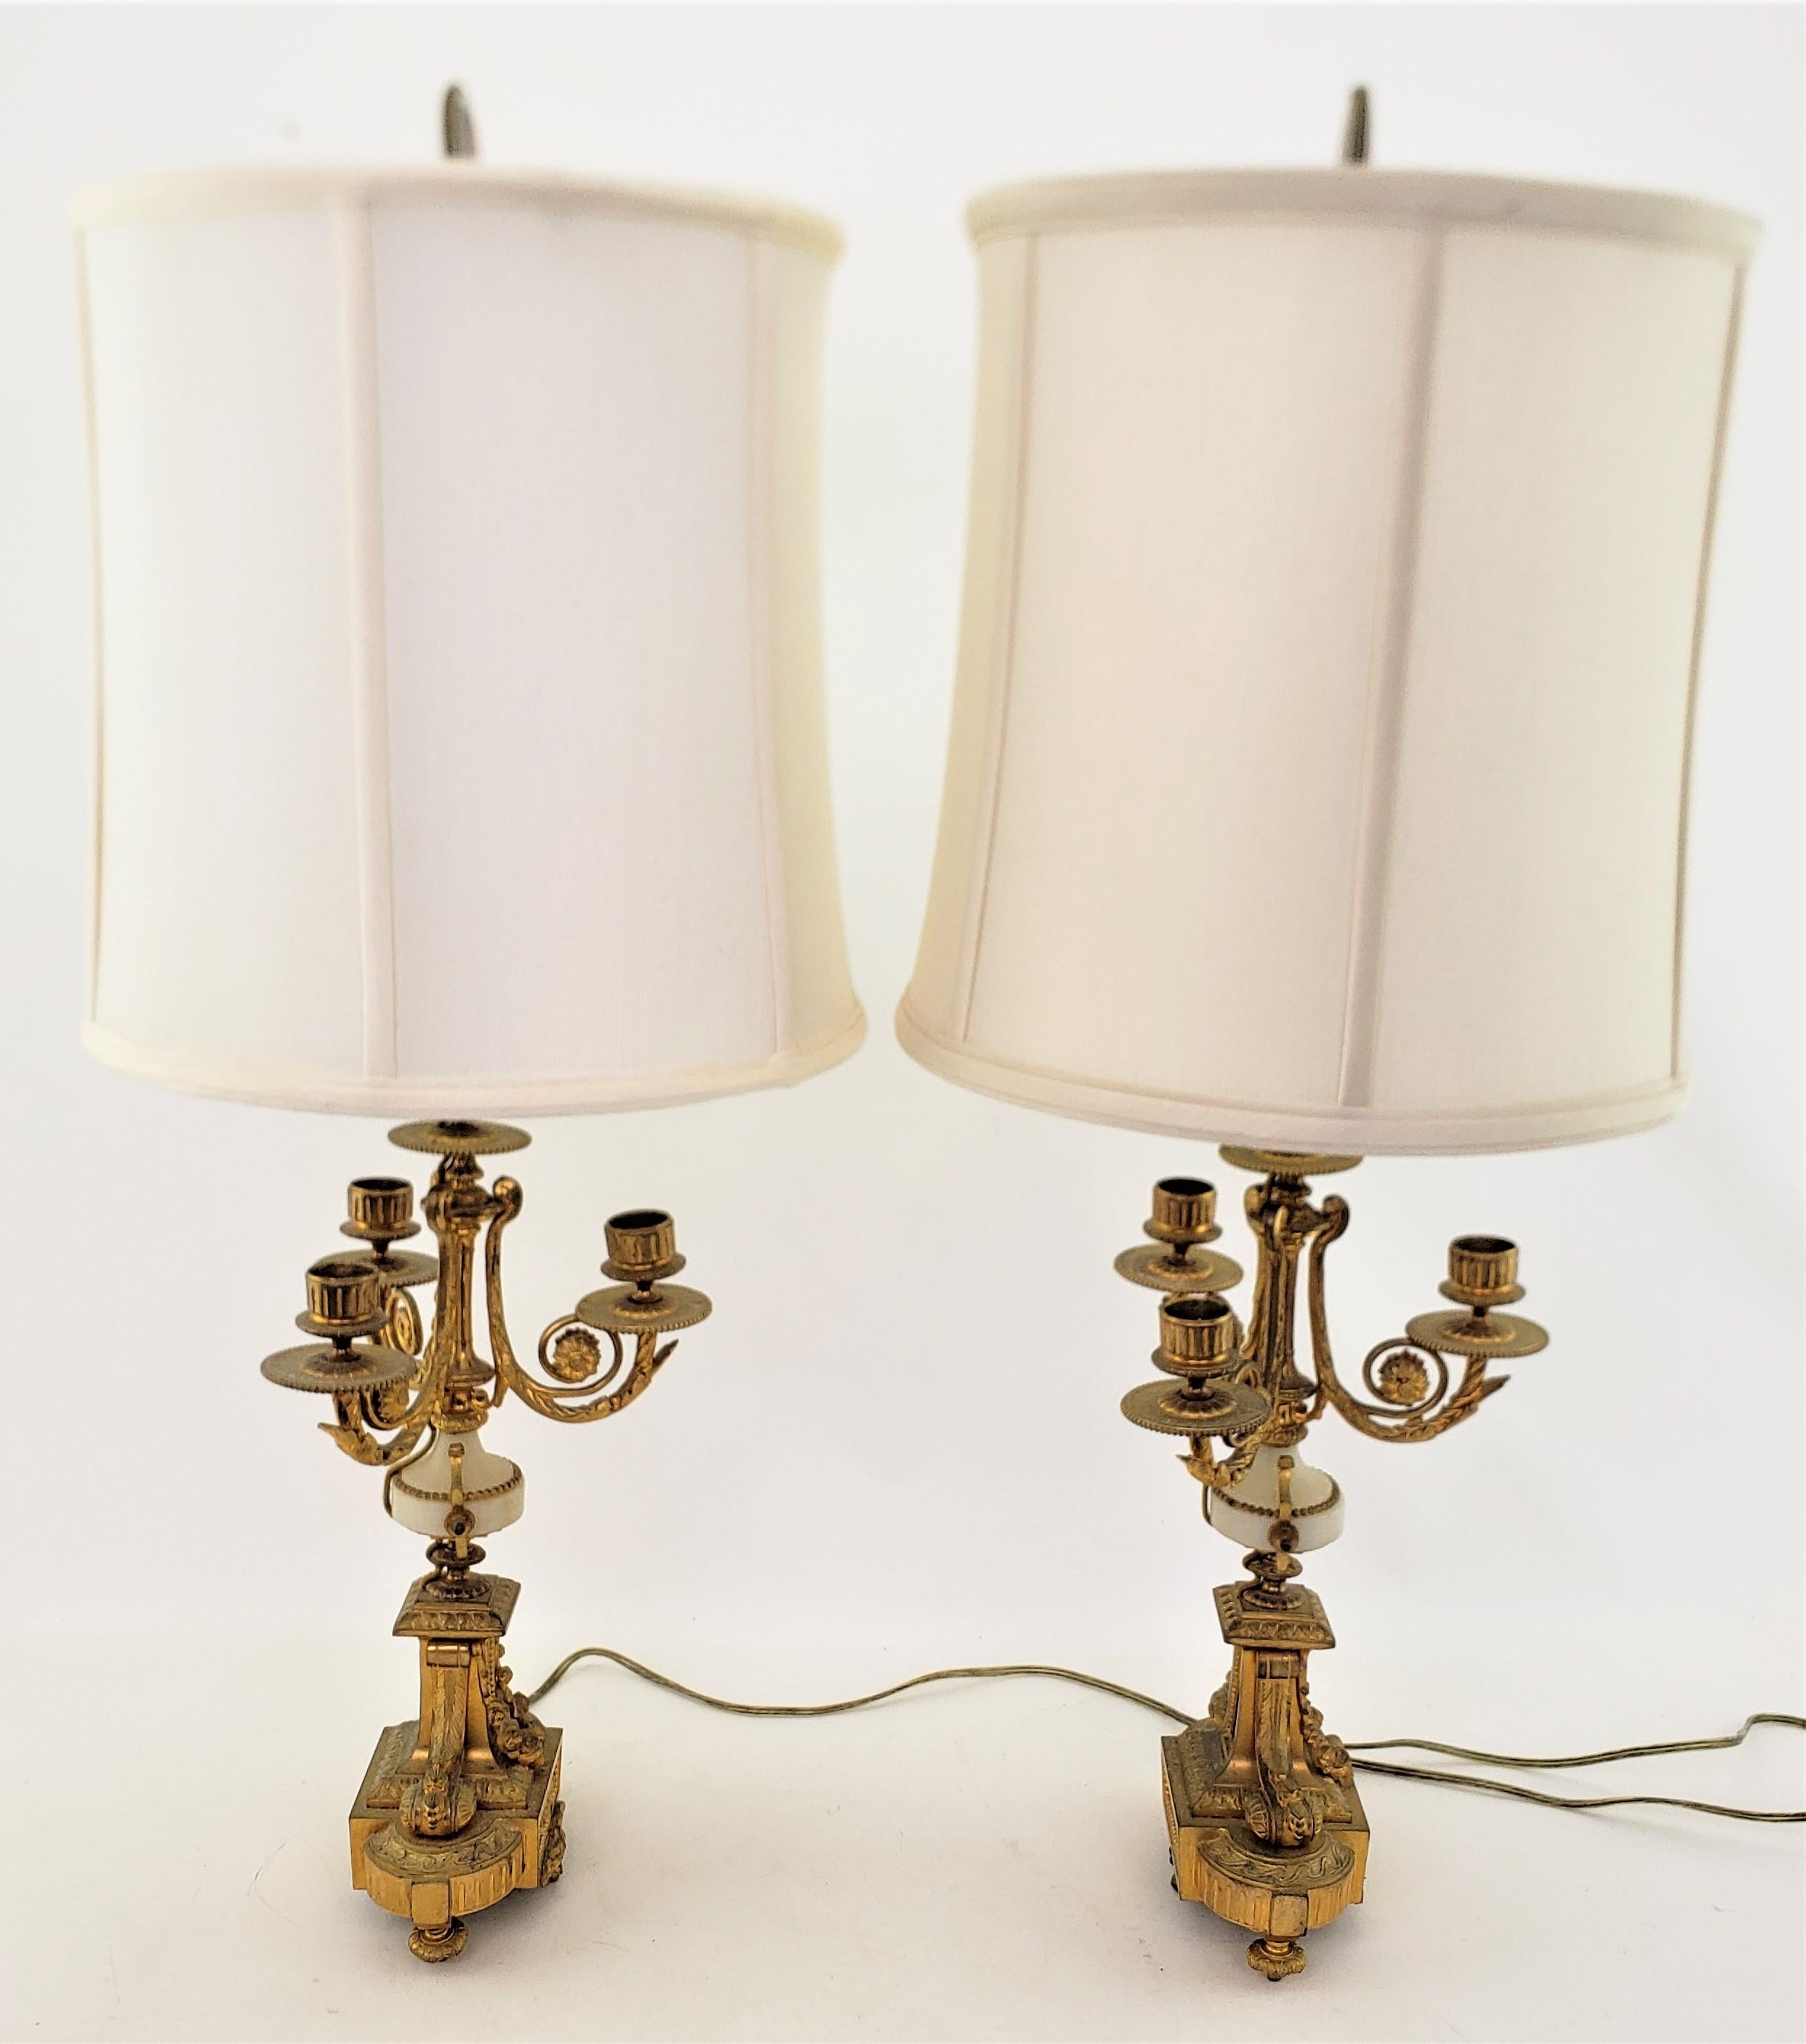 Pair of Ornate Antique French Gilt Bronze Converted Candelabra Table Lamps For Sale 1